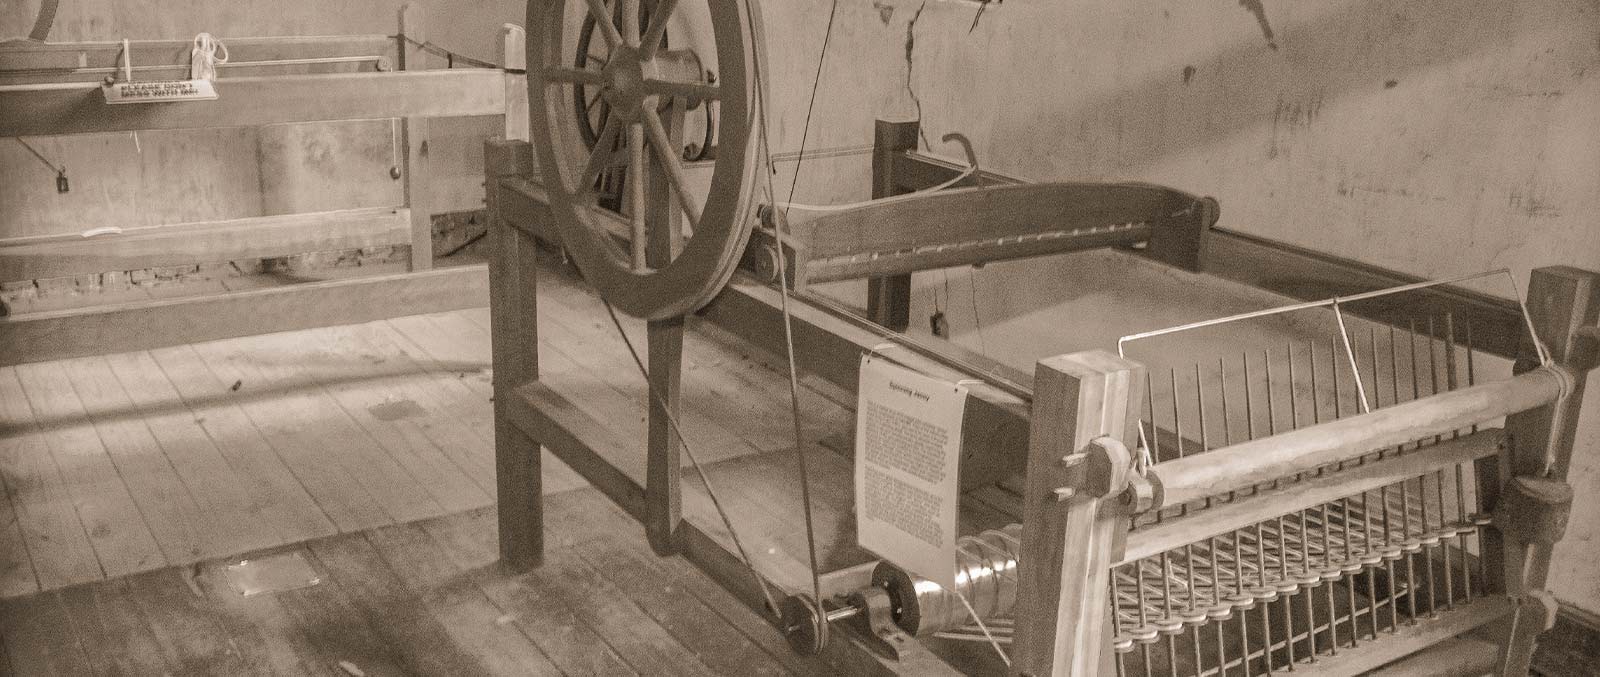 old wooden loom for making thread